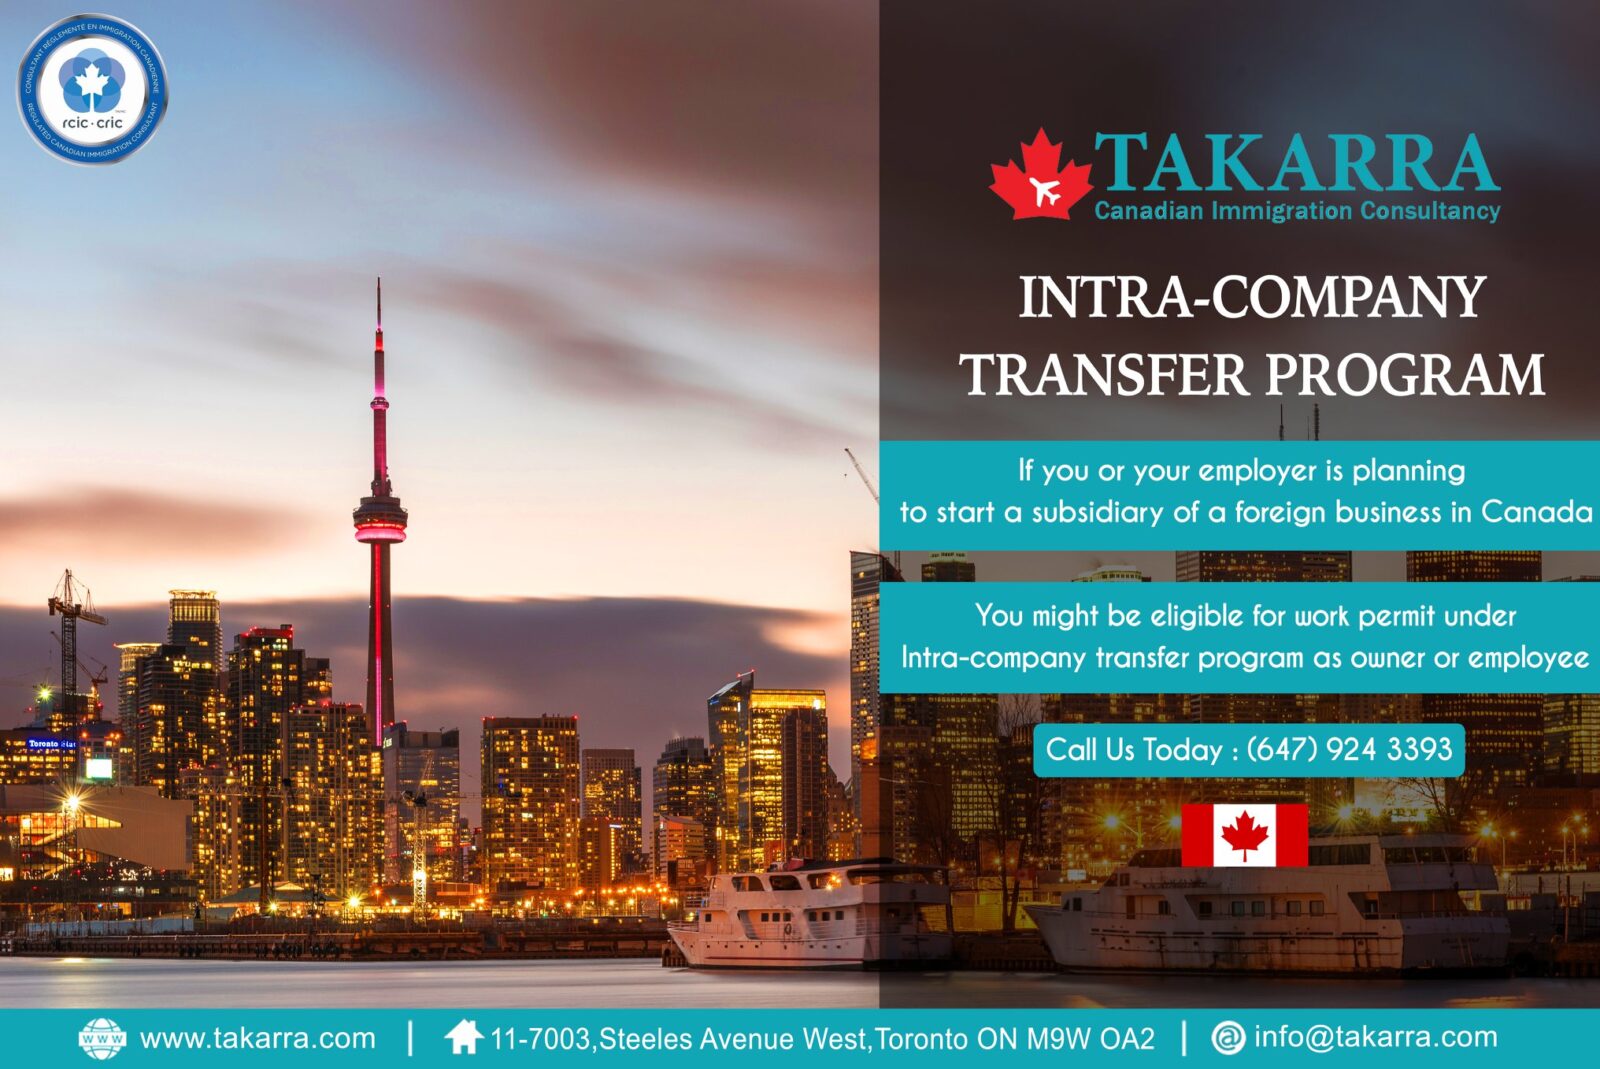 Intra-Company Transfer Program for Business Immigration